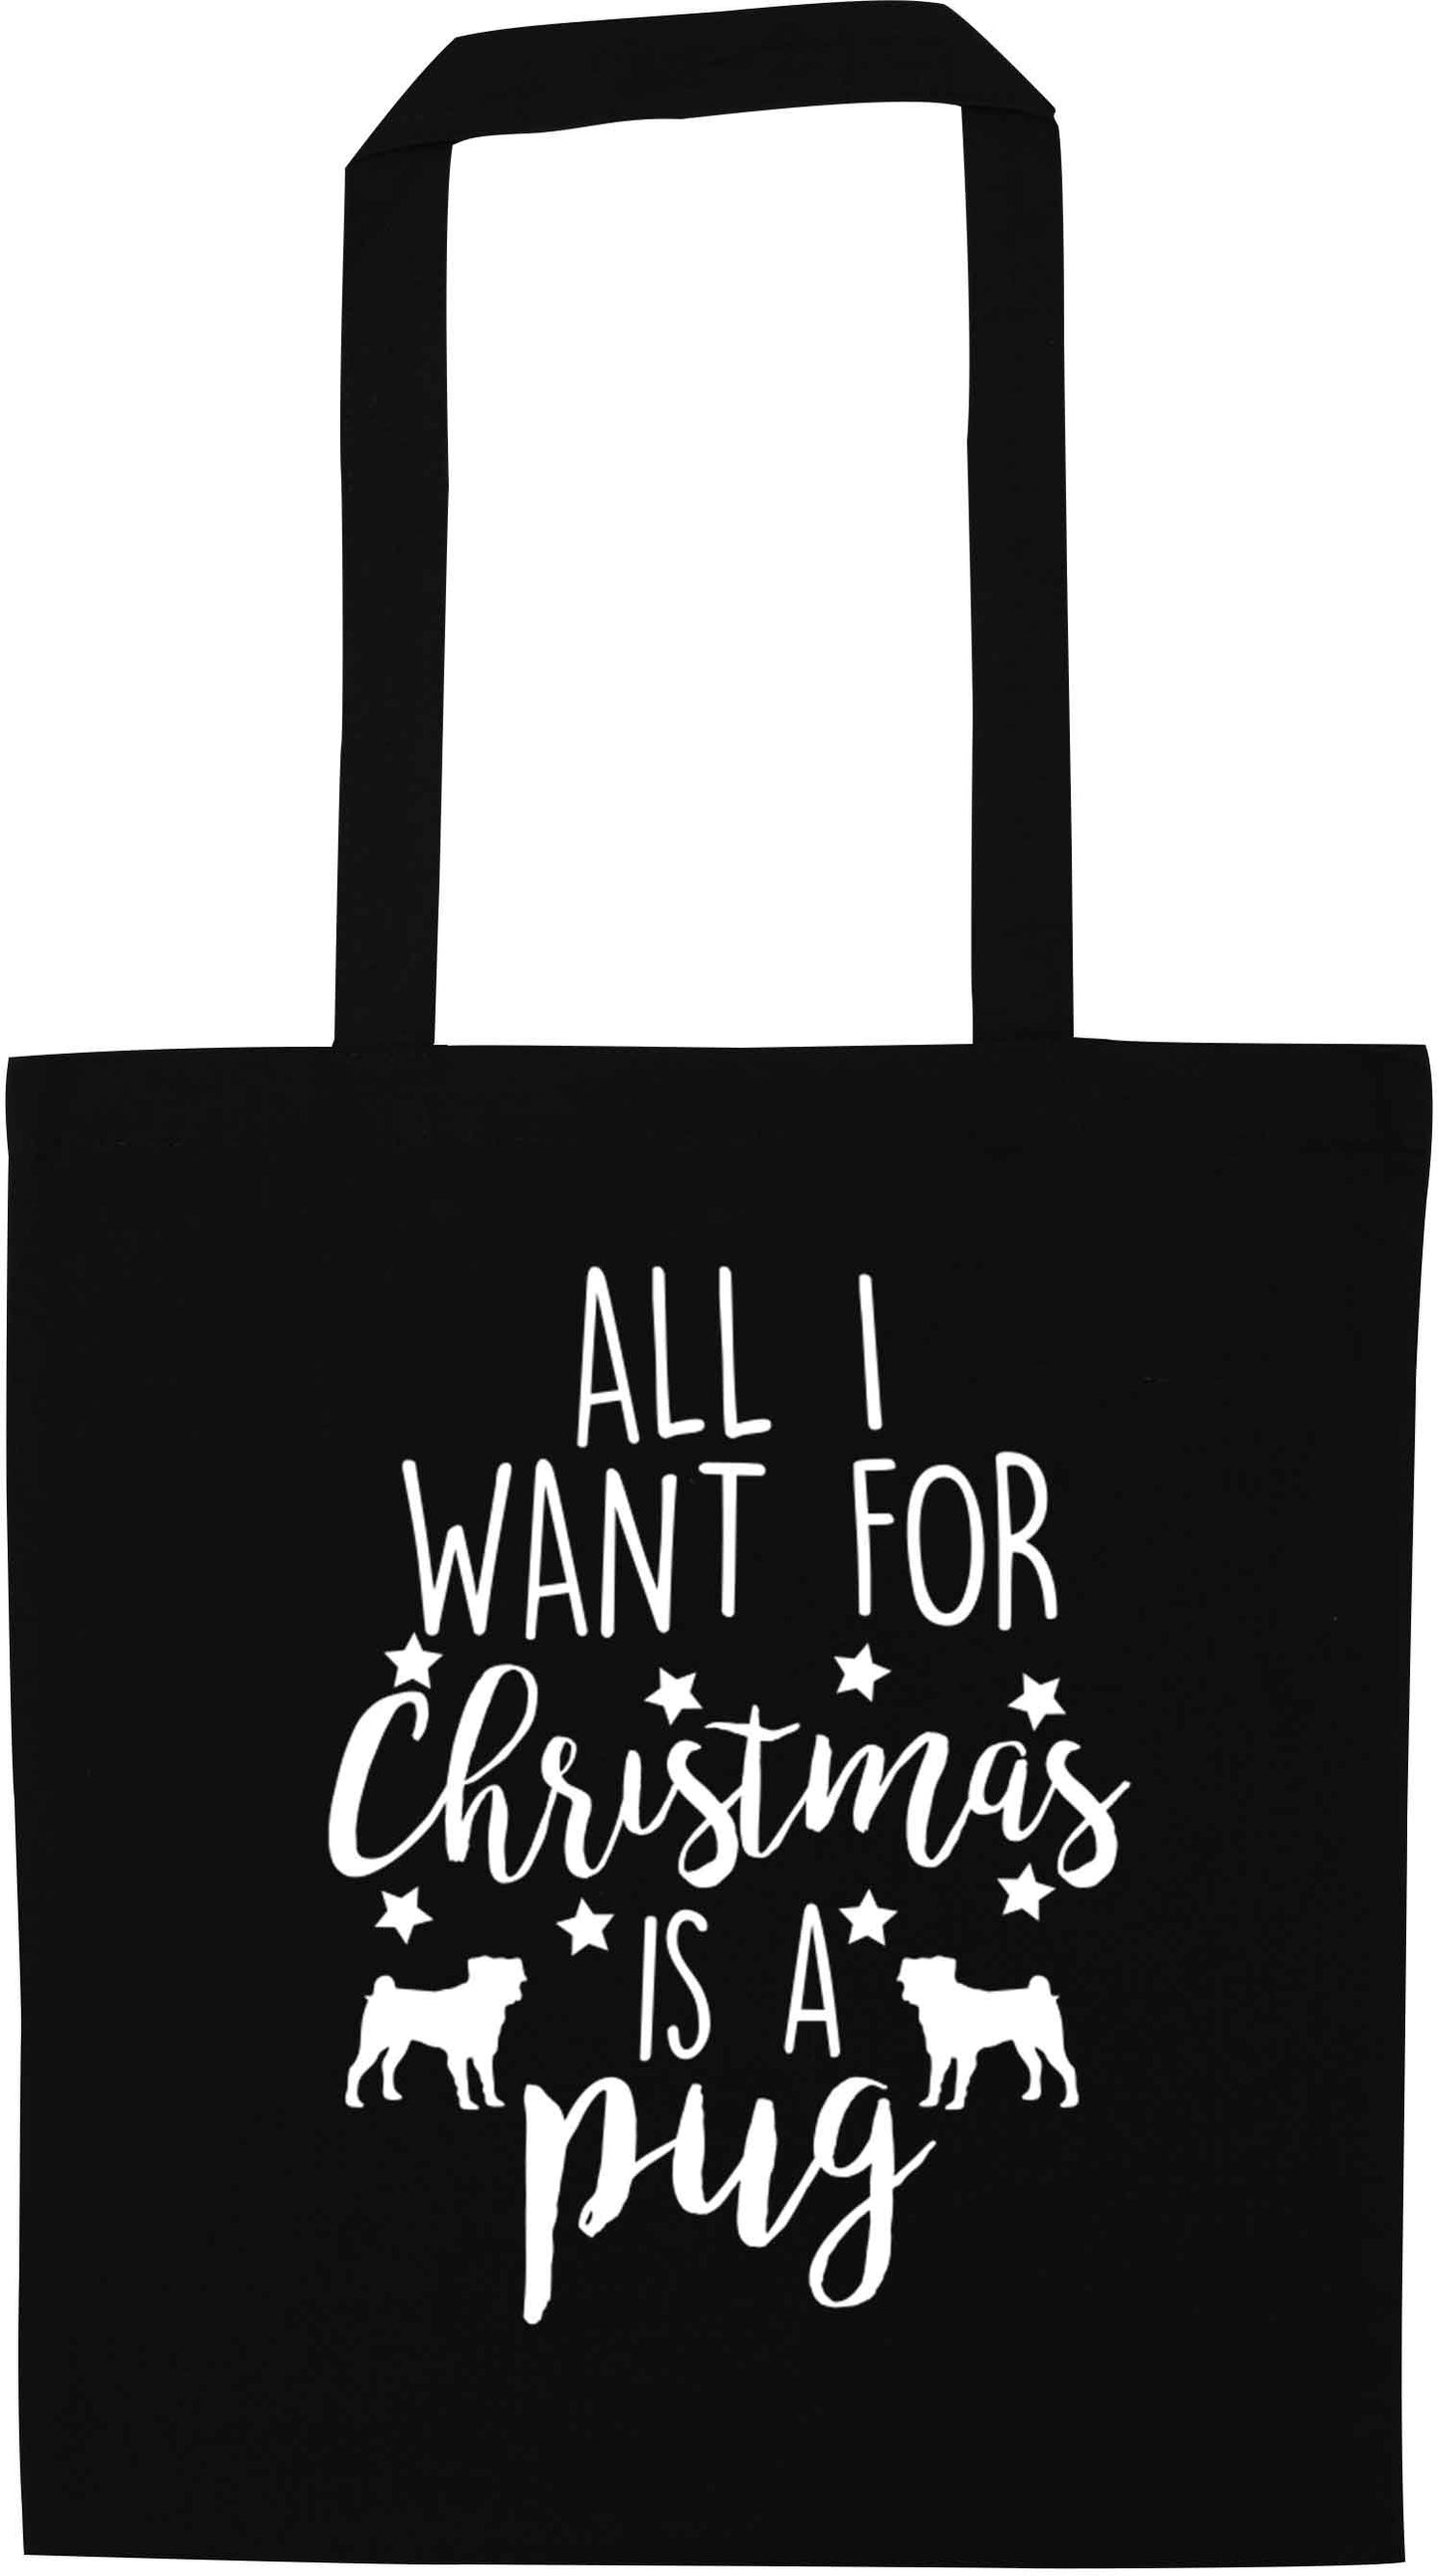 All I want for Christmas is a pug black tote bag